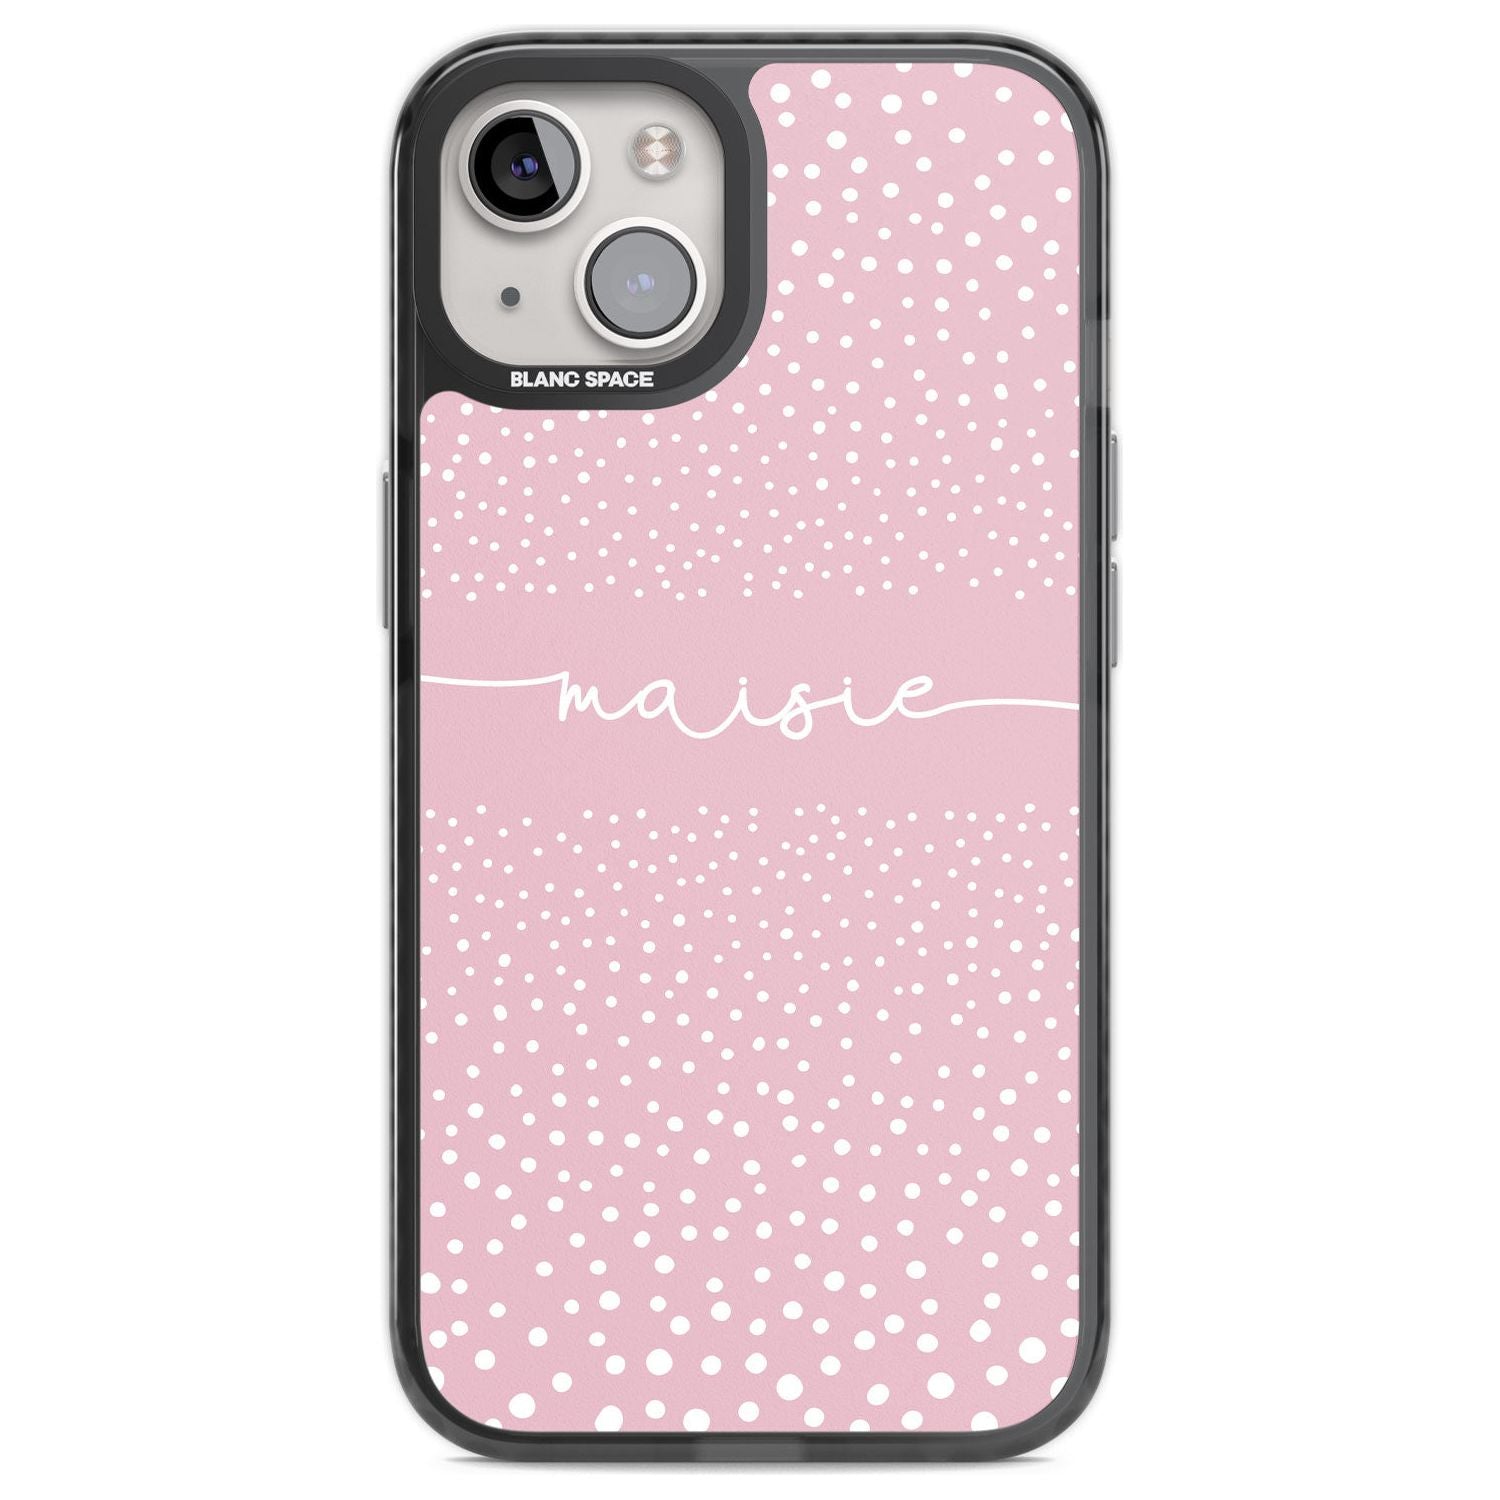 Personalised Pink Dots Custom Phone Case iPhone 12 / Black Impact Case,iPhone 13 / Black Impact Case,iPhone 12 Pro / Black Impact Case,iPhone 14 / Black Impact Case,iPhone 15 Plus / Black Impact Case,iPhone 15 / Black Impact Case Blanc Space